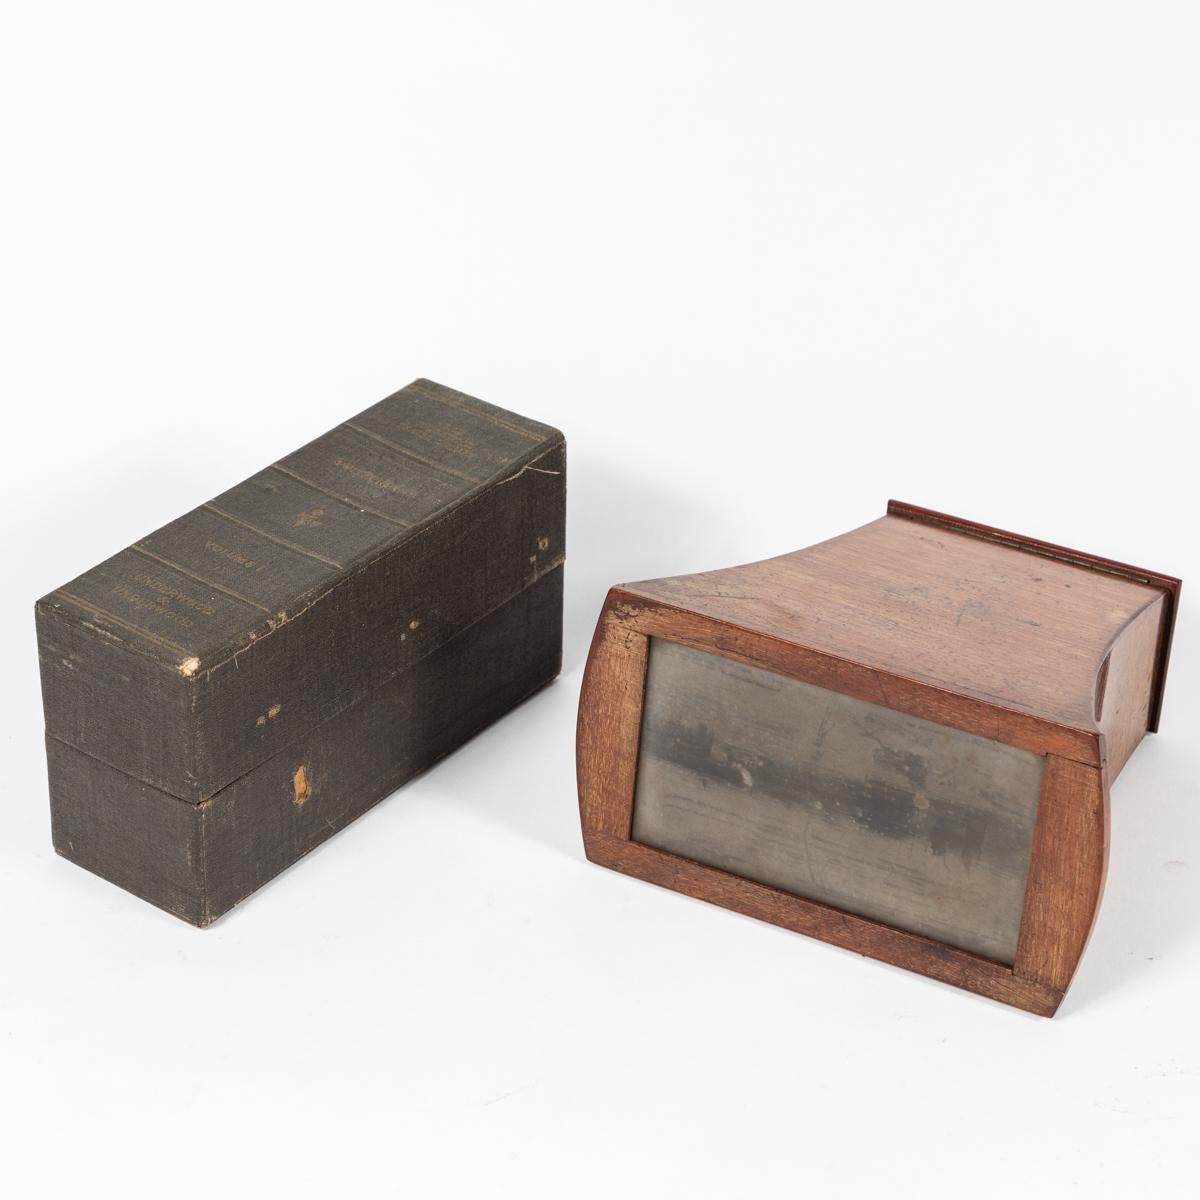 Vintage Wood Stereoscope with Sepia Toned Cards from Late 19th Century, England For Sale 2